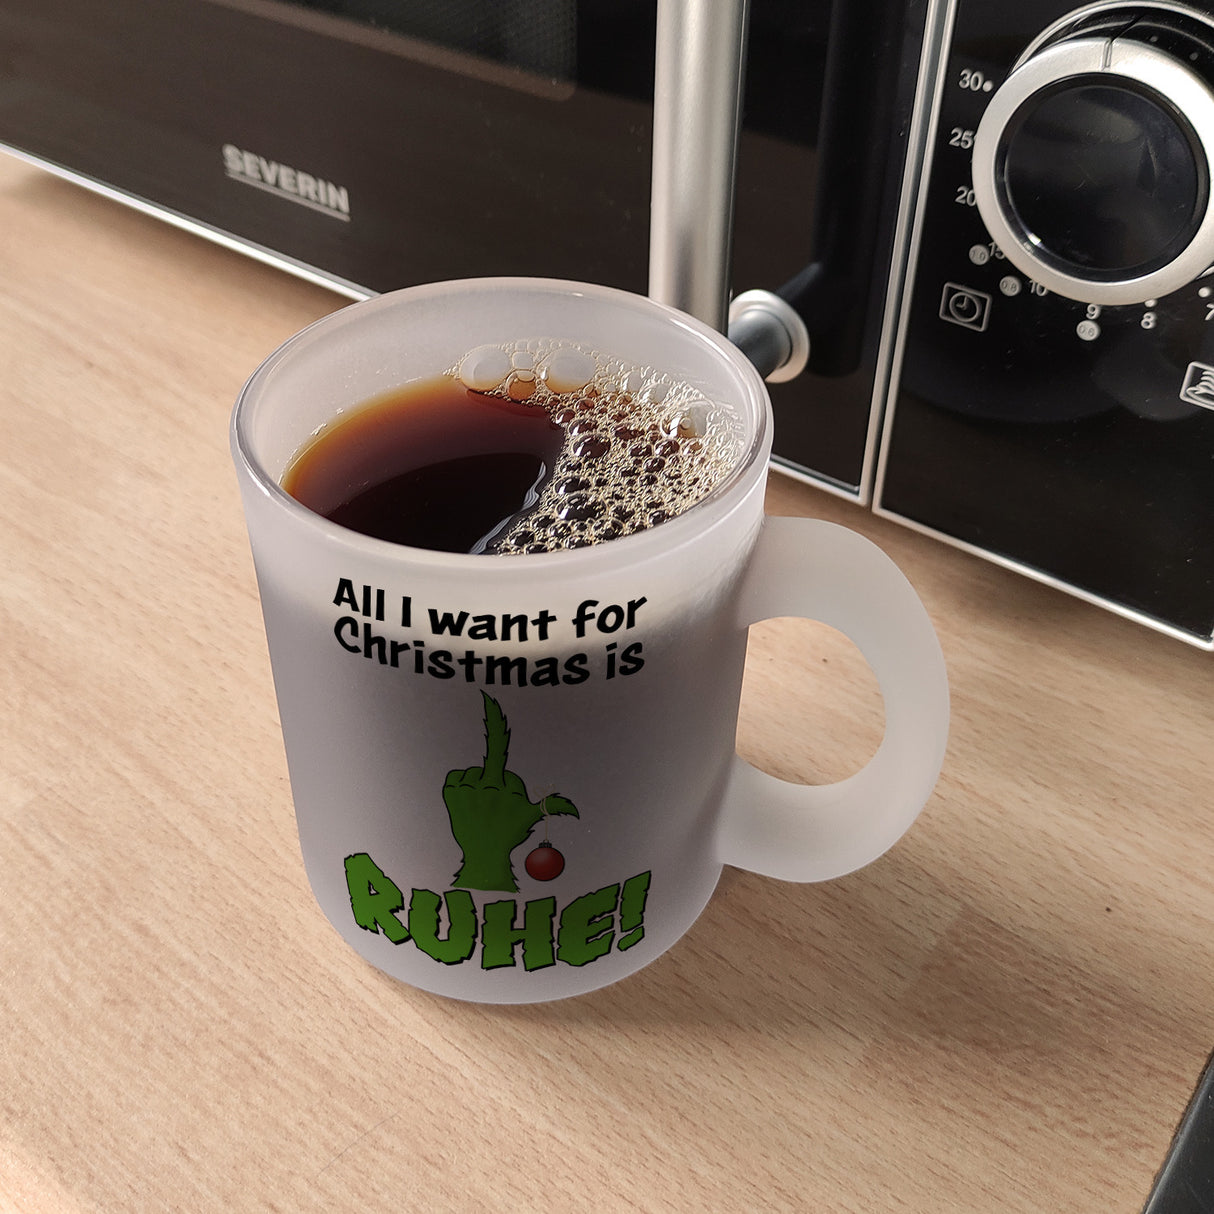 Weihnachtsmuffel Kaffeebecher mit Spruch All I want for Christmas is Ruhe